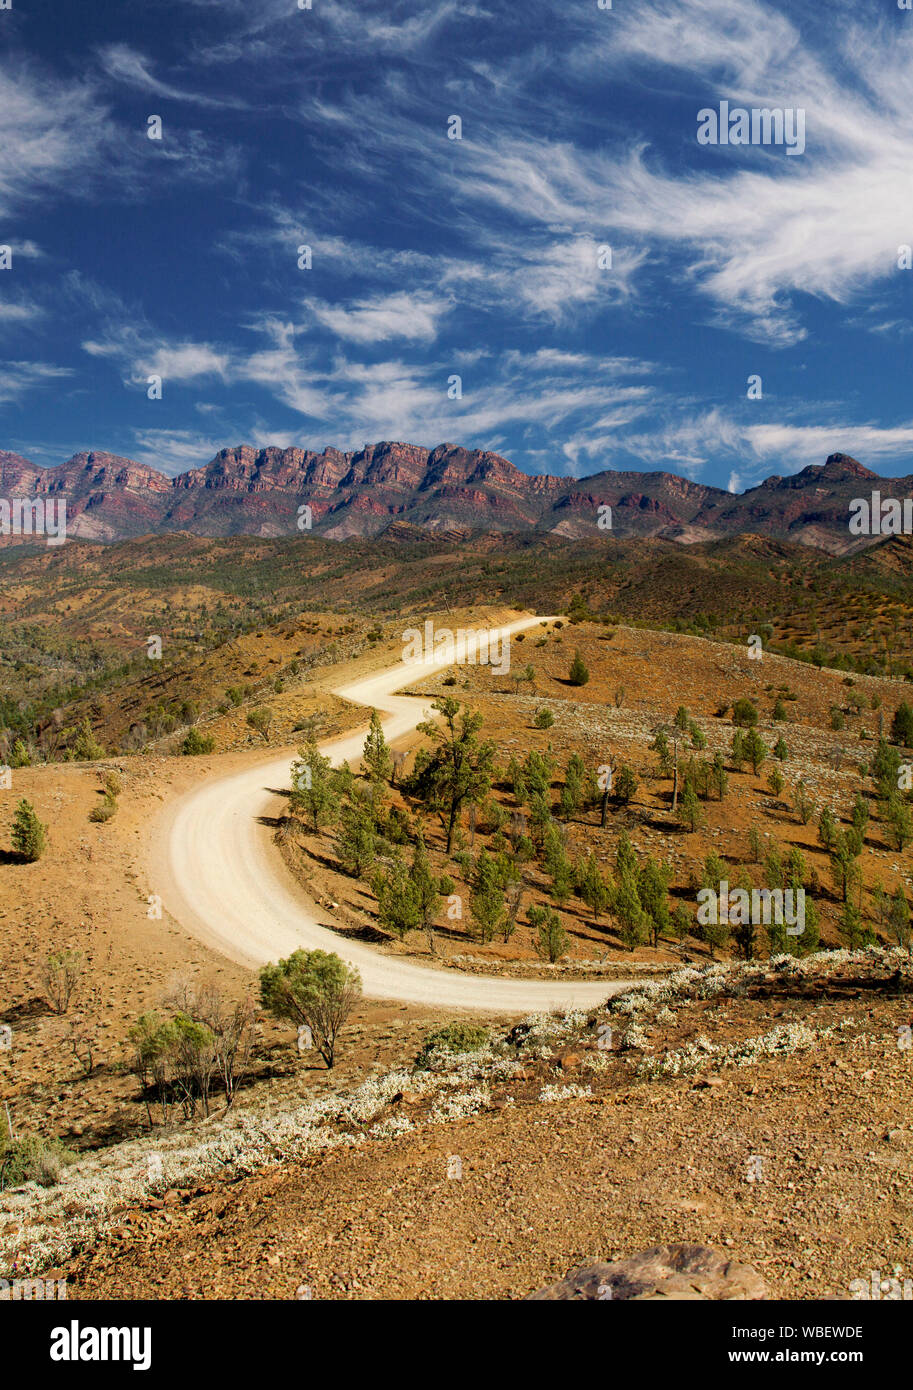 Road winding through Flinders Ranges National Park with rugged rocky ranges reaching up into blue sky streaked with clouds, South Australia Stock Photo